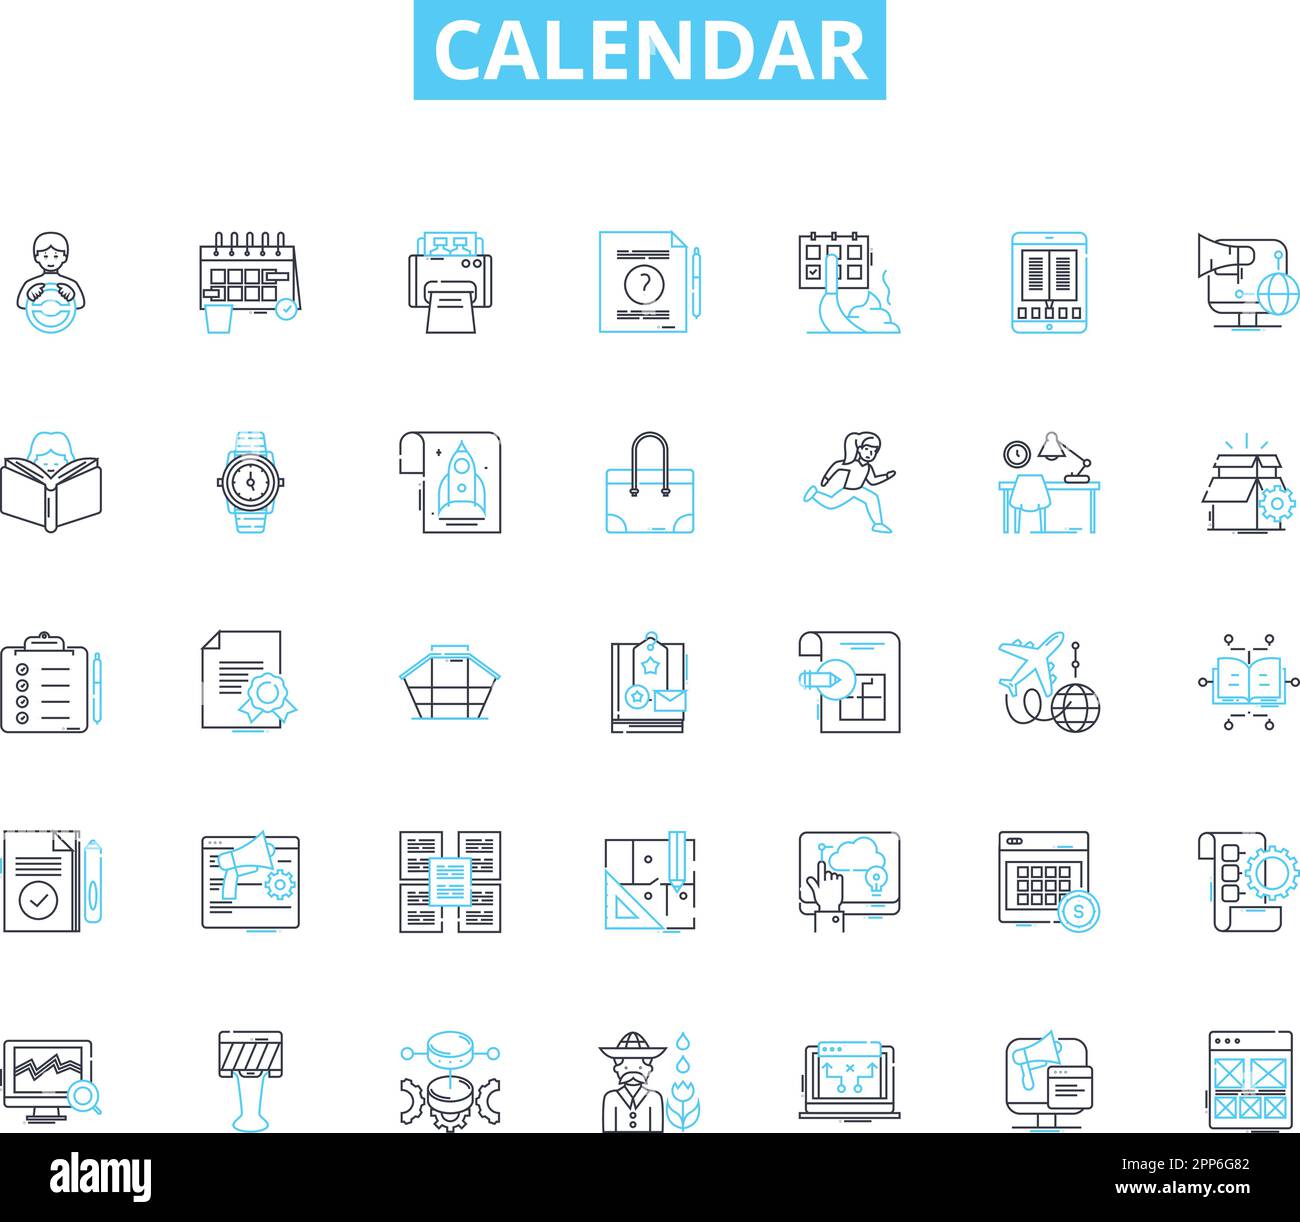 Calendar linear icons set. Scheduling, Organization, Reminders, Appointments, Planning, Time, Events line vector and concept signs. Dates,Schedule Stock Vector